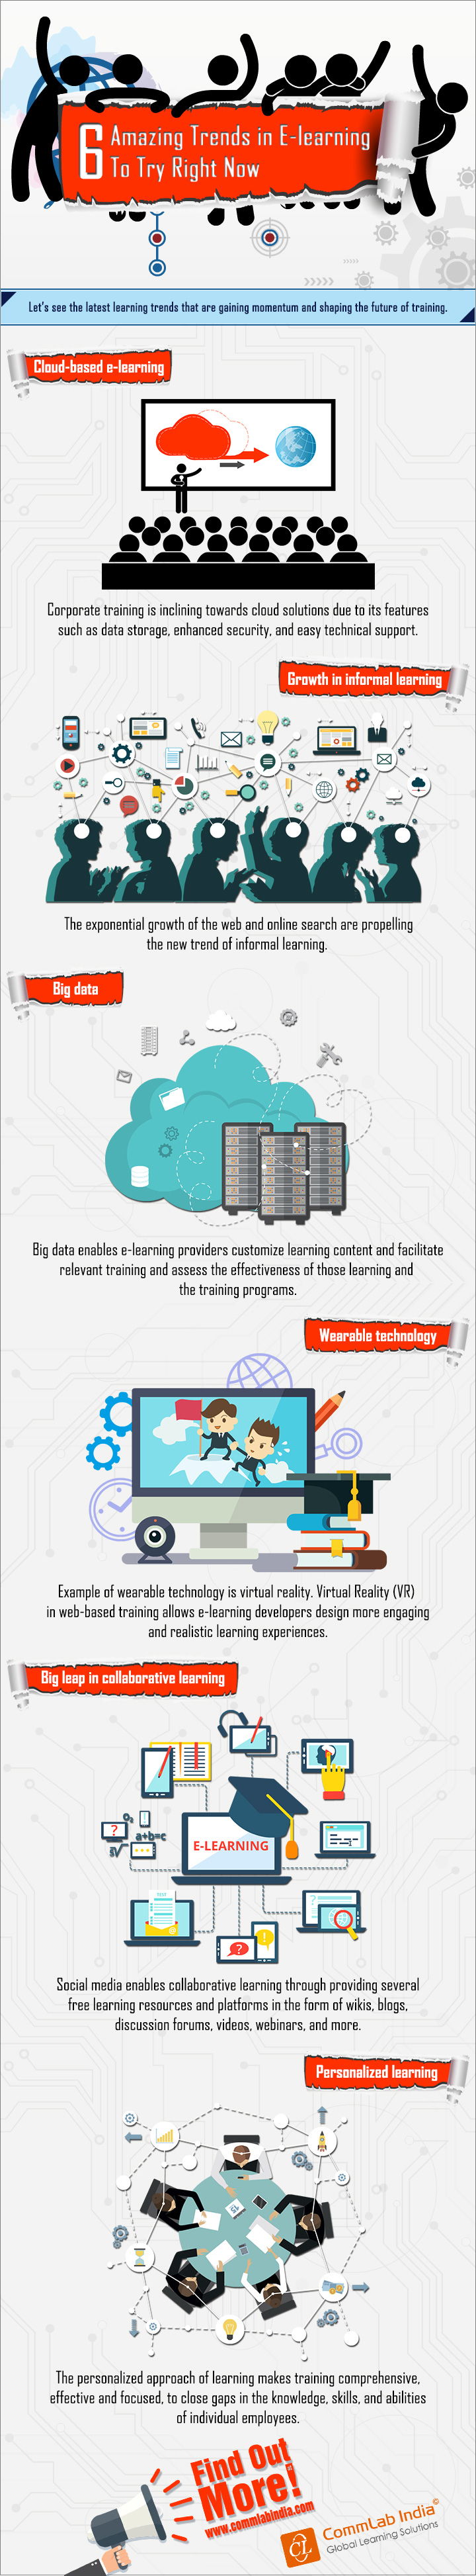 6 Amazing Trends in E-learning to Try Right Now [Infographic]